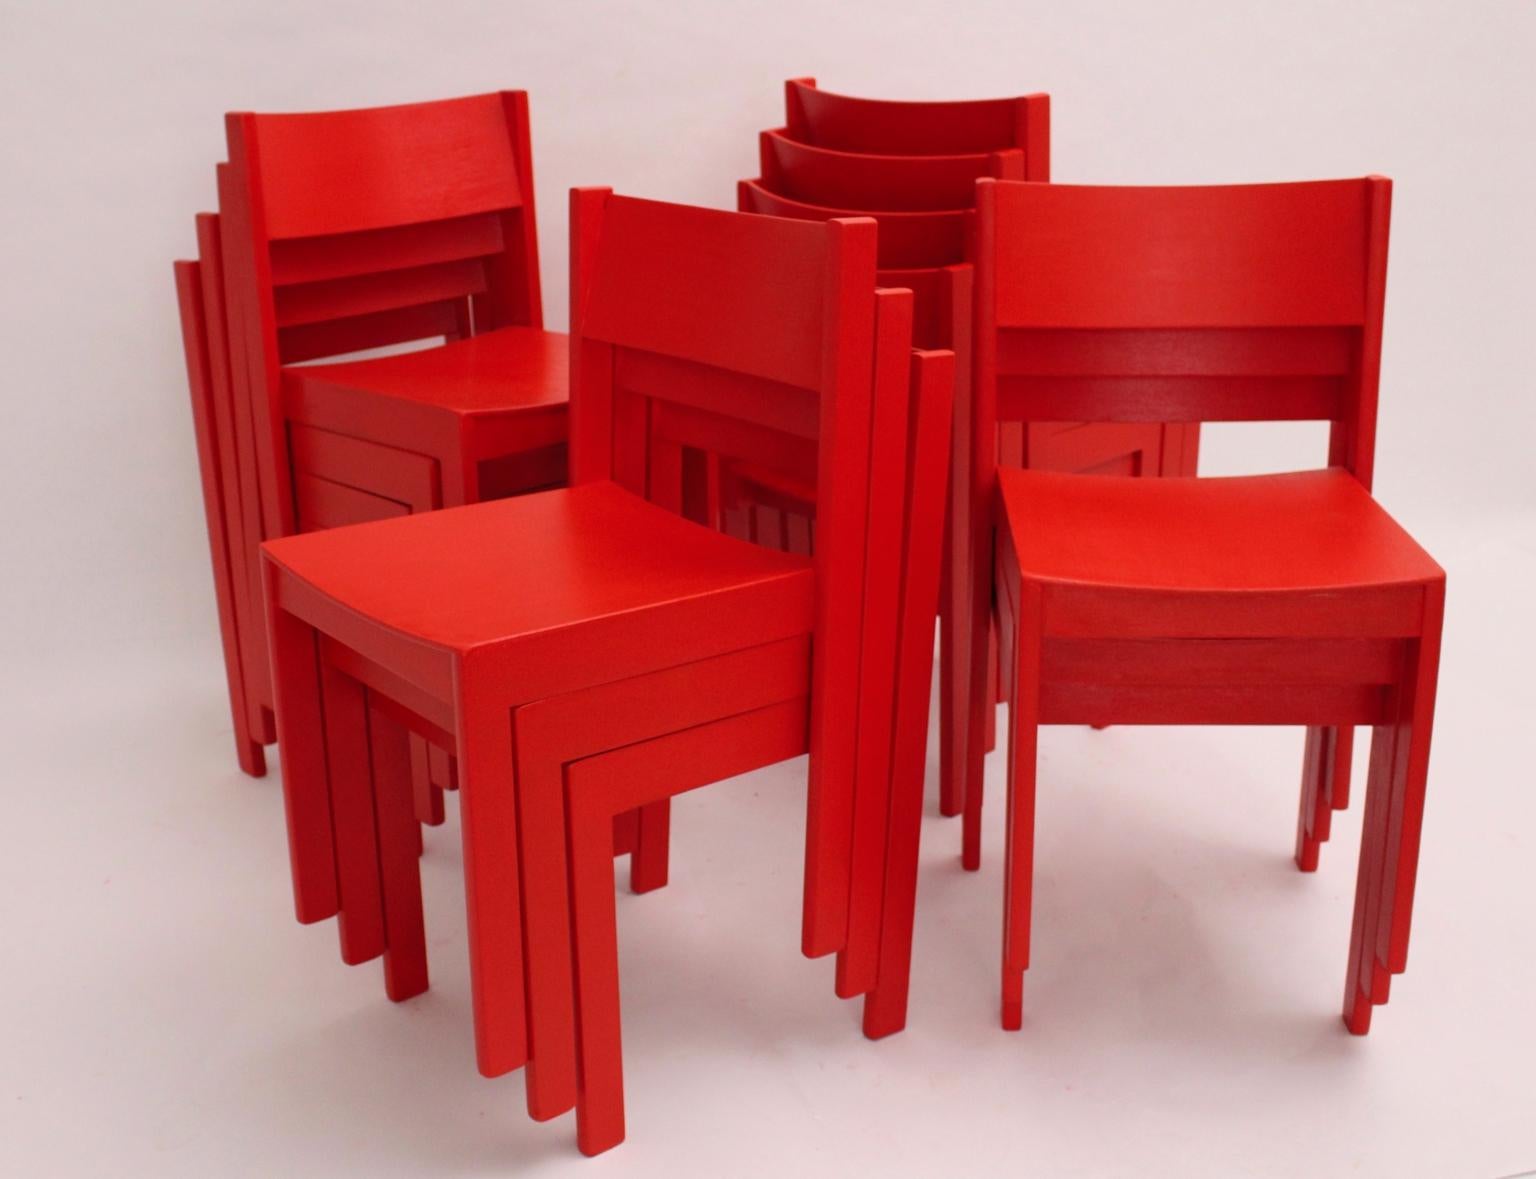 Beech Mid-Century Modern Vintage Red Dining Room Chairs Carl Auböck, 1956, Vienna